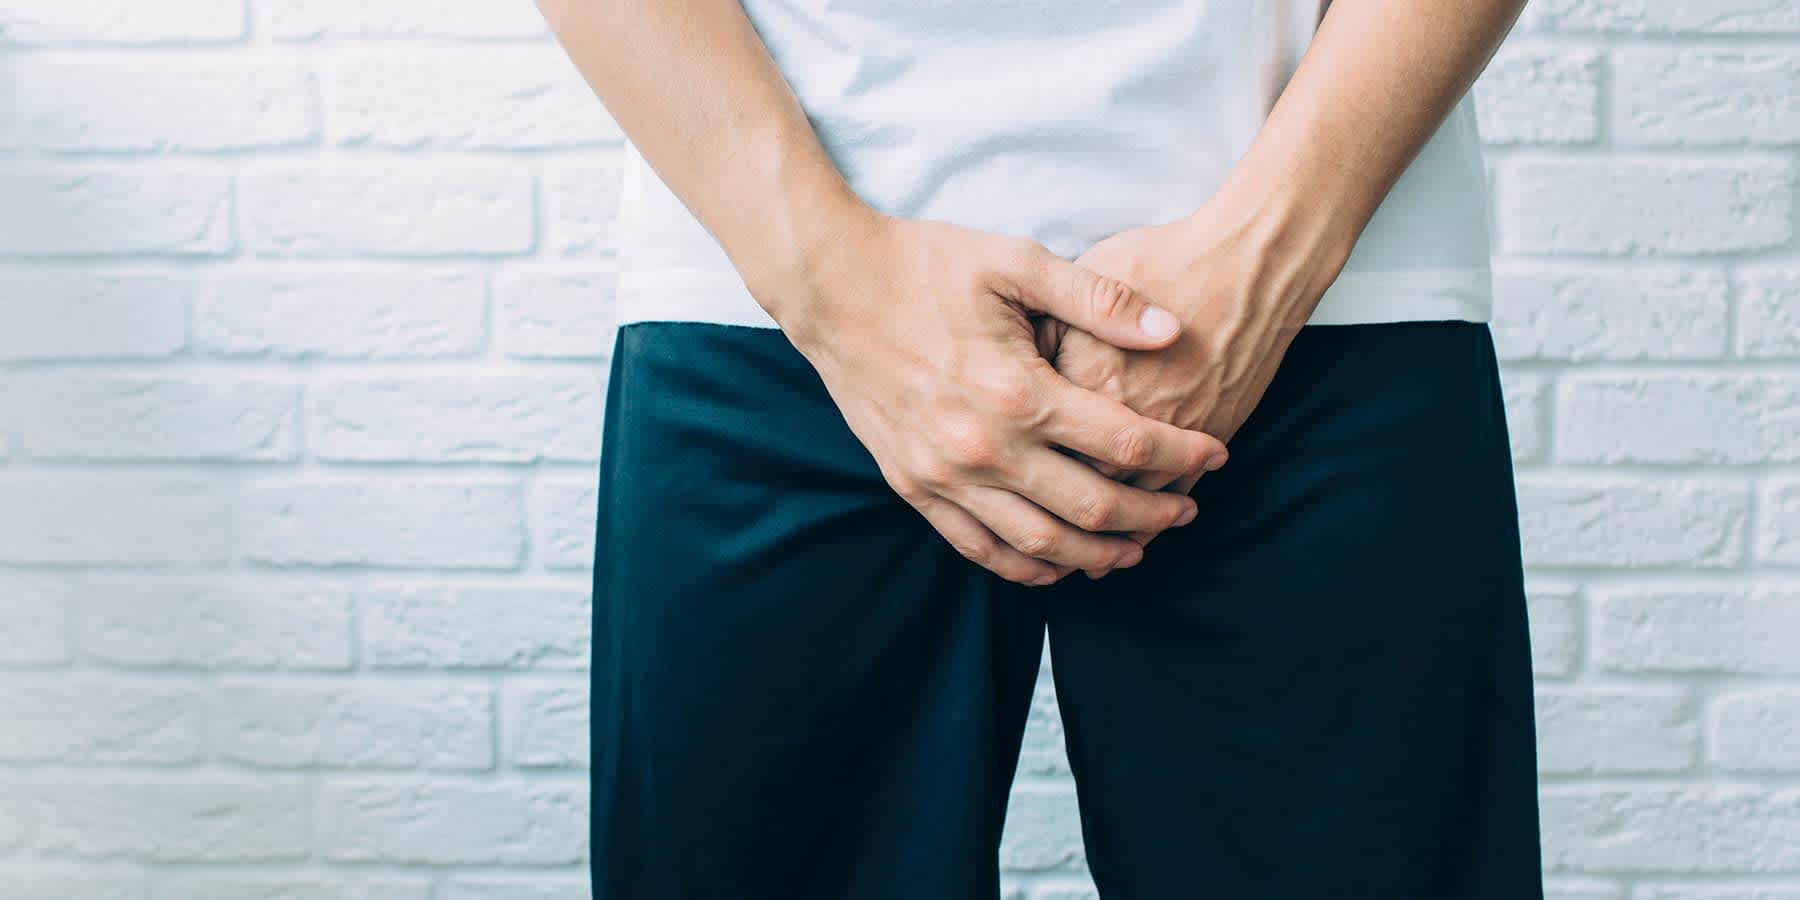 Man with hands over his groin wondering about bumps on penis